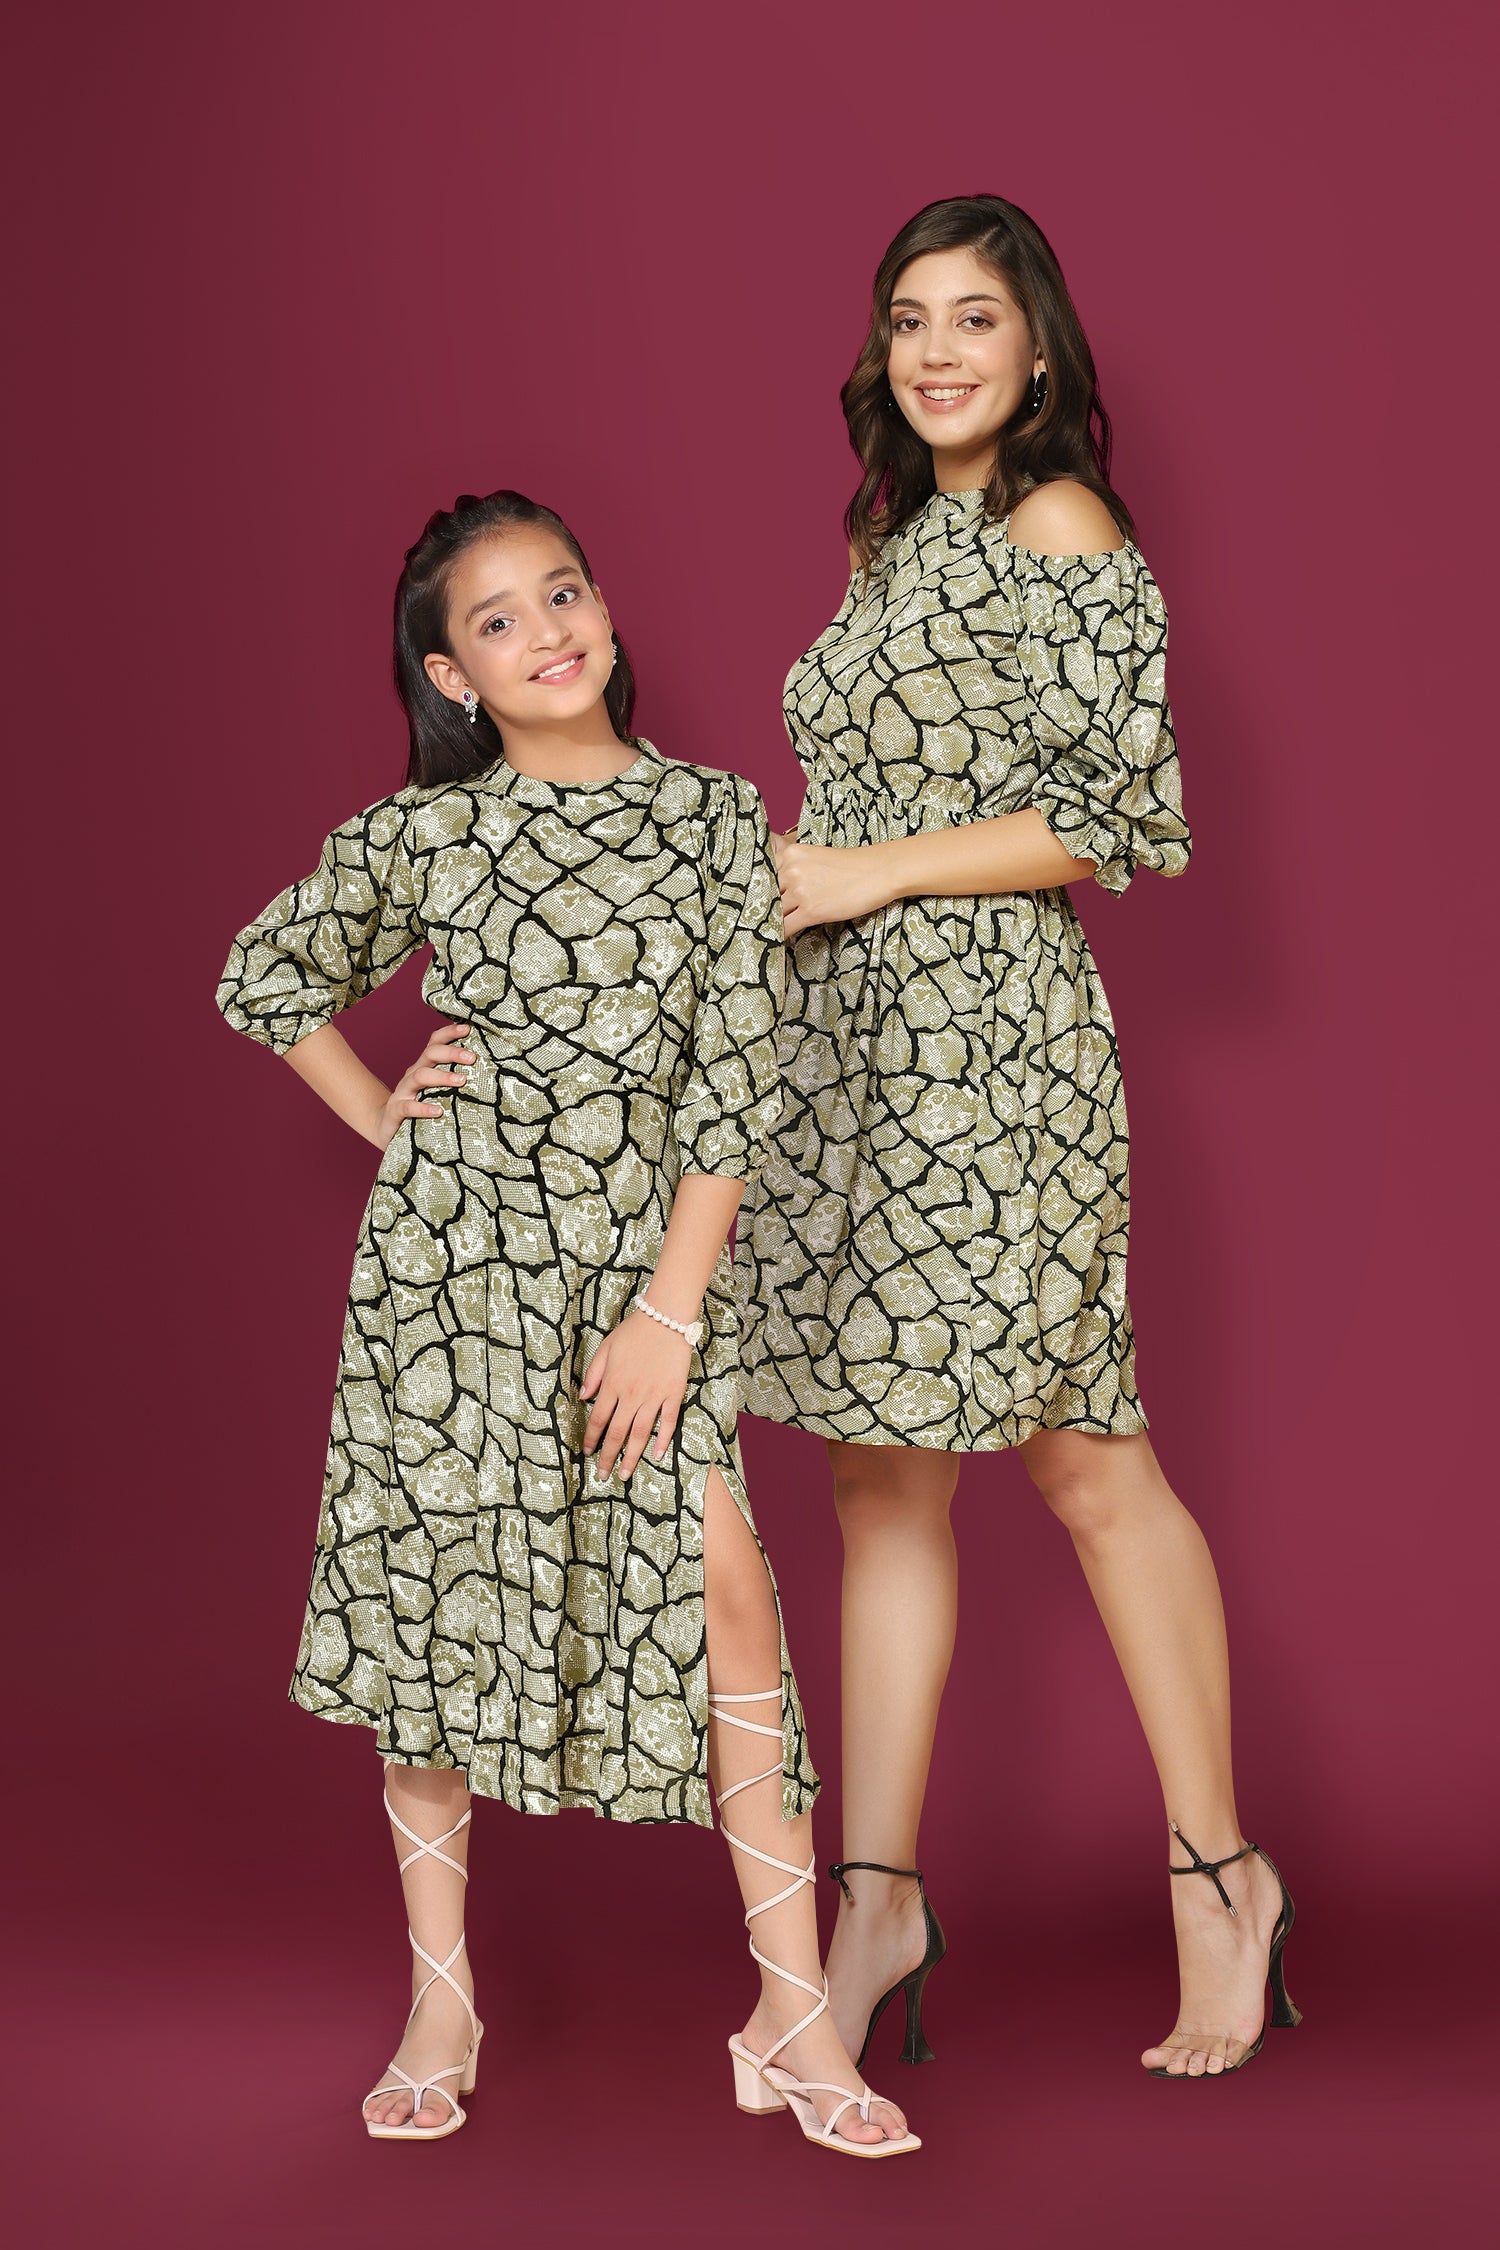 Buy HOK Mother Daughter Combo, Mother Daughter Twinning Set, Mother Daughter  Kaftan Set, Mother Daughter Matching Dress, Pink Color, Mom: S to XL  Daughter: 3-12 yrs (Pair, 2PCS) at Amazon.in